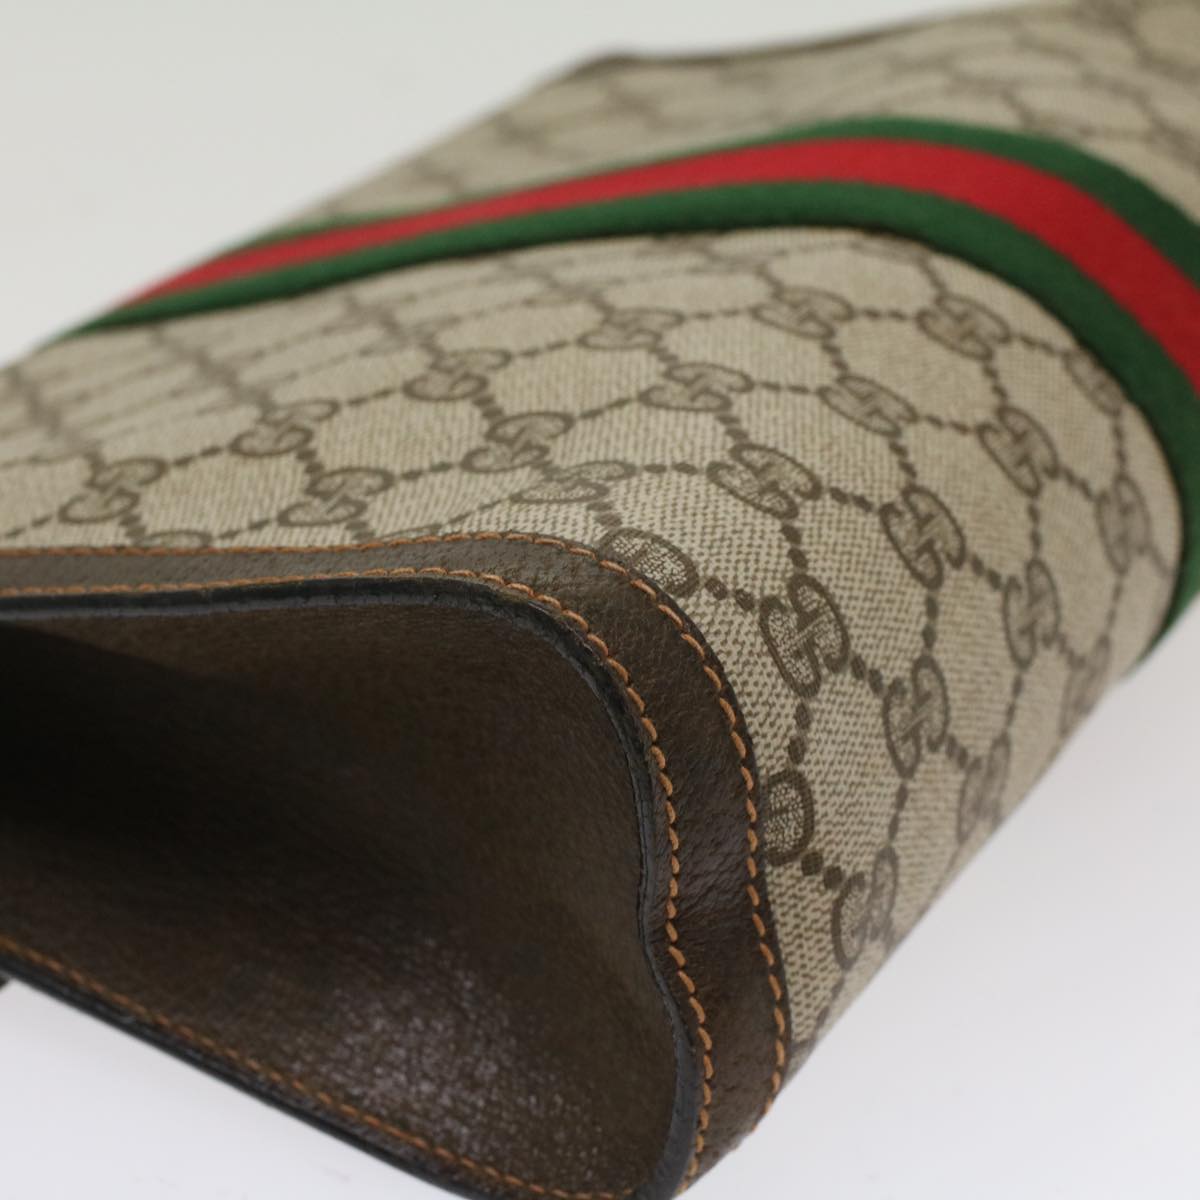 GUCCI GG Canvas Web Sherry Line Clutch Bag Beige Red Green 84.01.007 Auth yk7987